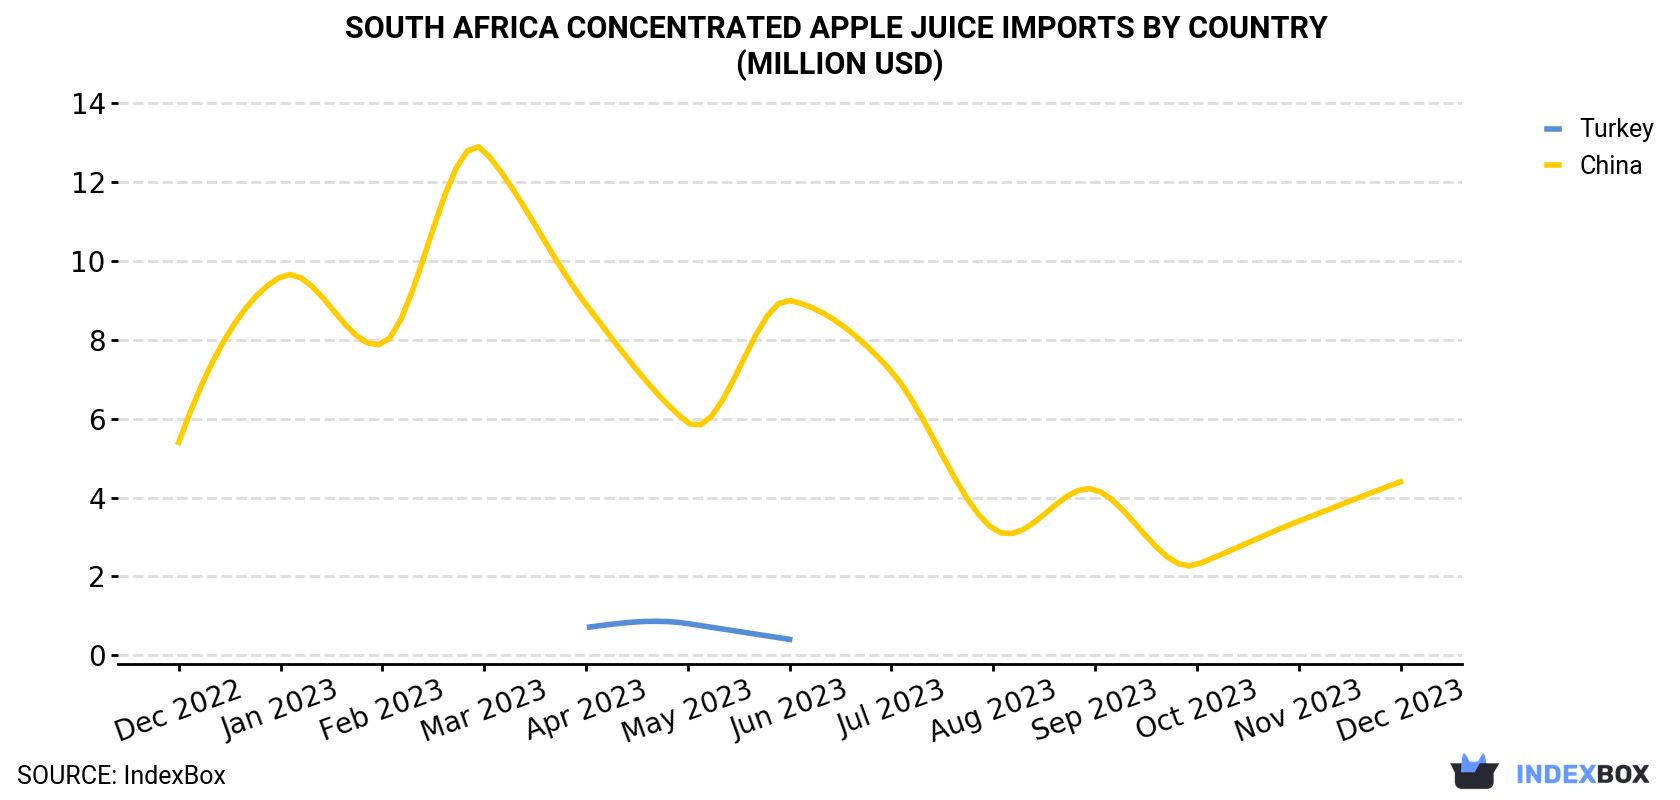 South Africa Concentrated Apple Juice Imports By Country (Million USD)